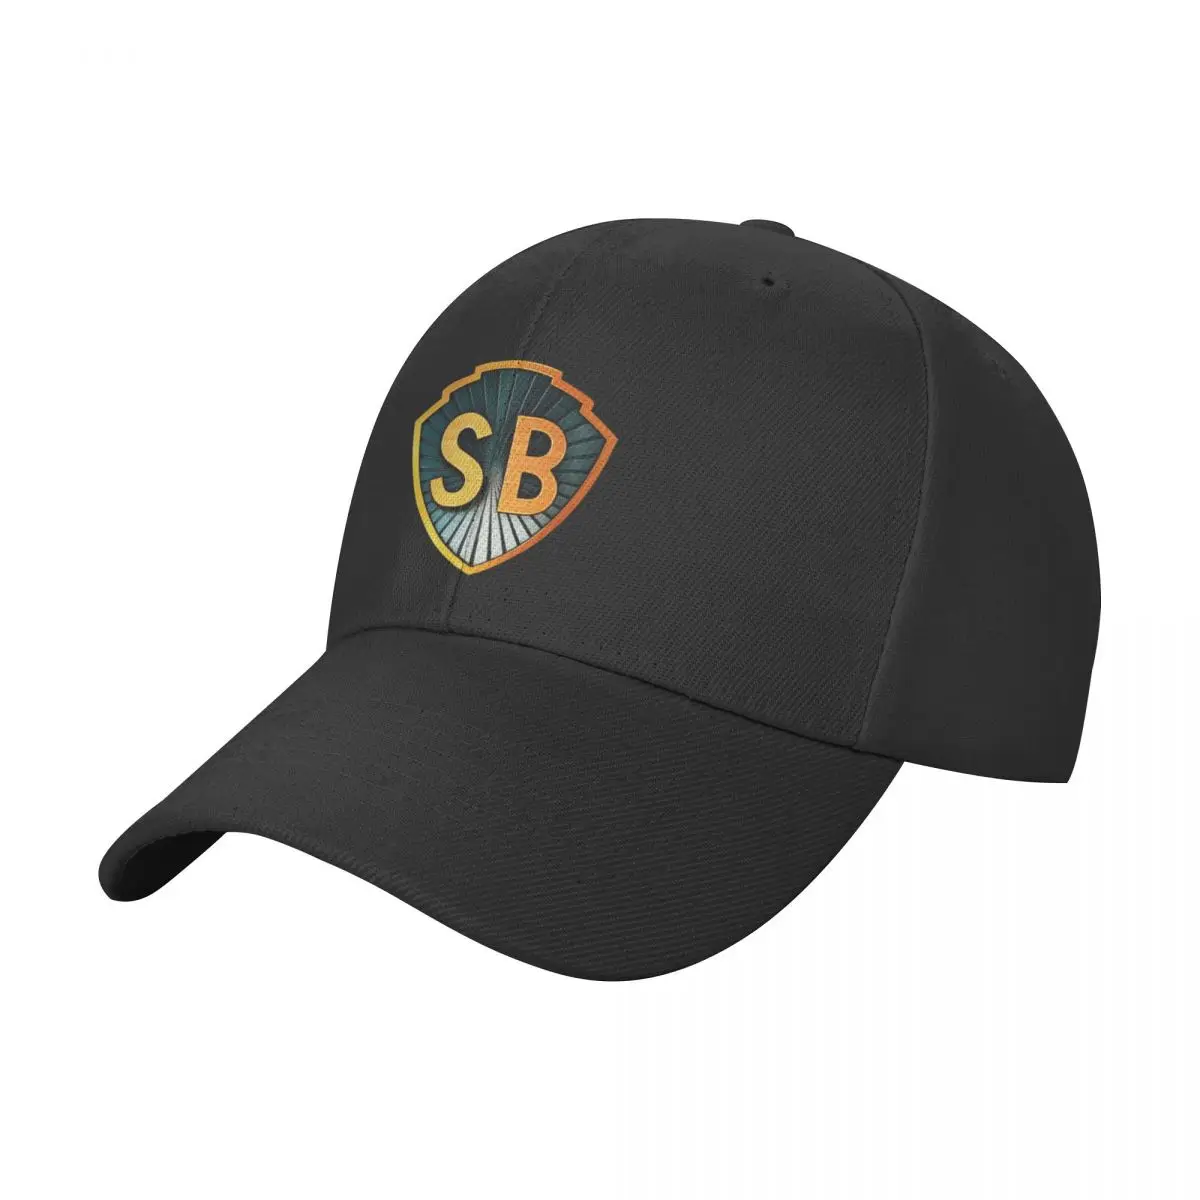 

Shaw Brothers Kung Fu Cinema Logo Baseball Cap Hood Snap Back Hat dad hat New In The Hat cute Cap Female Men's